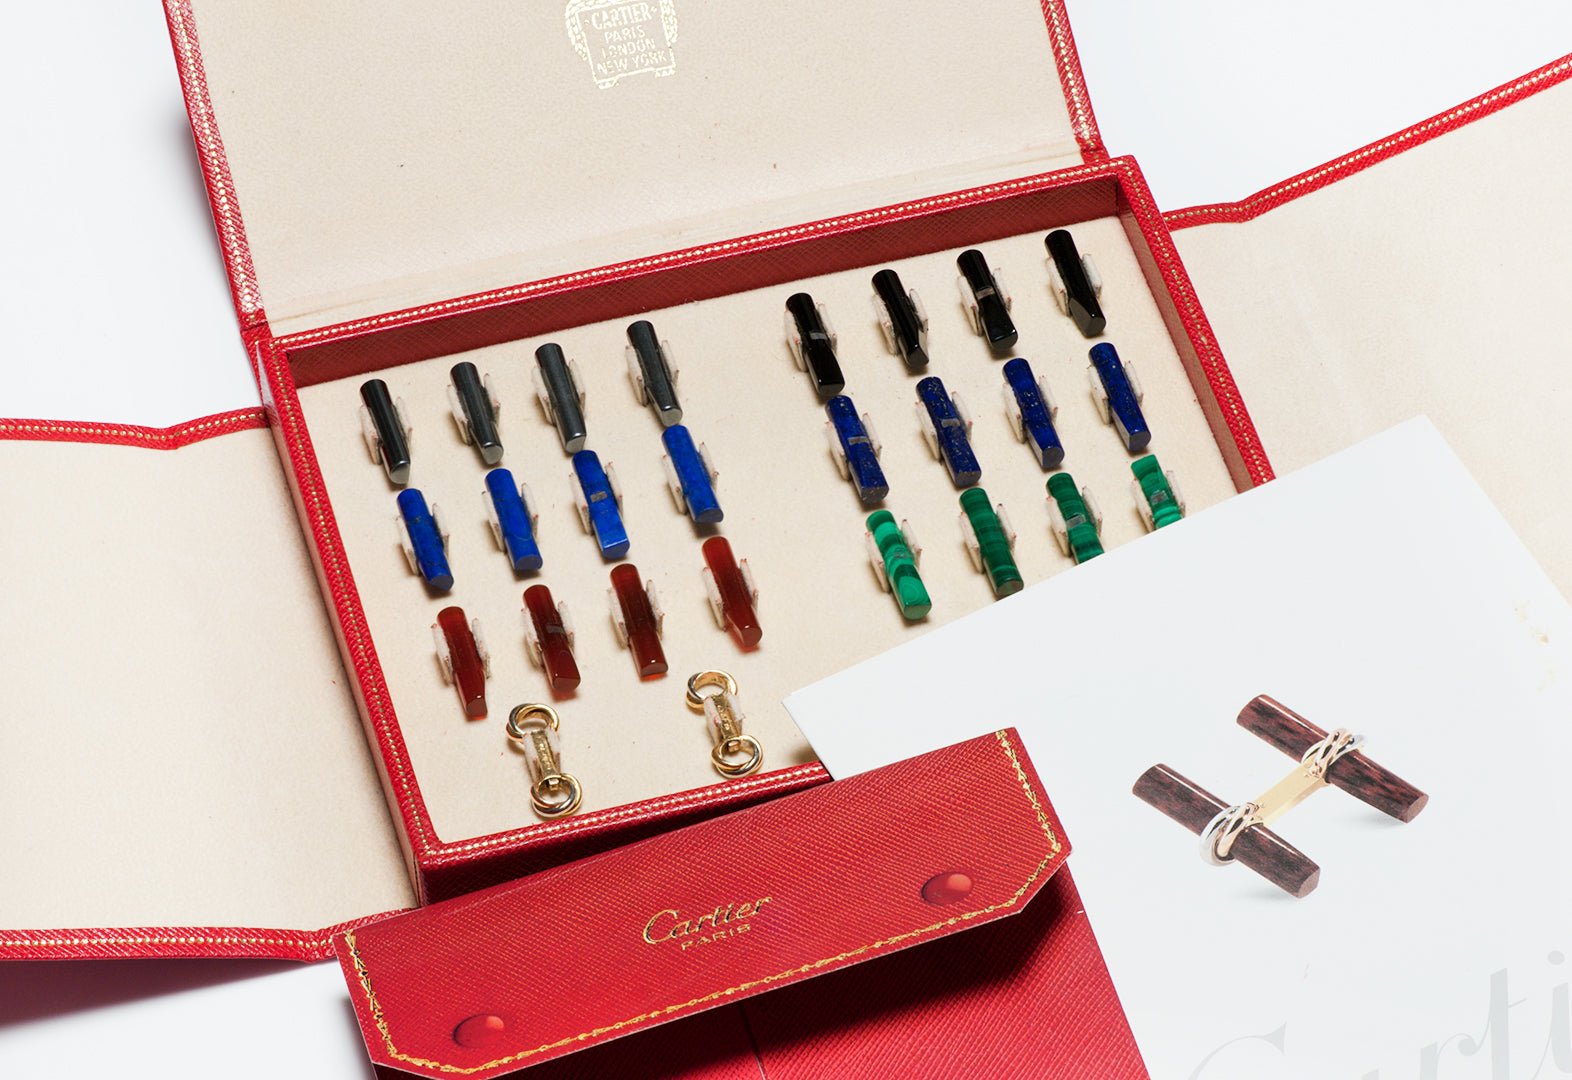 Cartier Interchangeable Cufflinks with Matching Interchangeable Studs - DSF Antique Jewelry